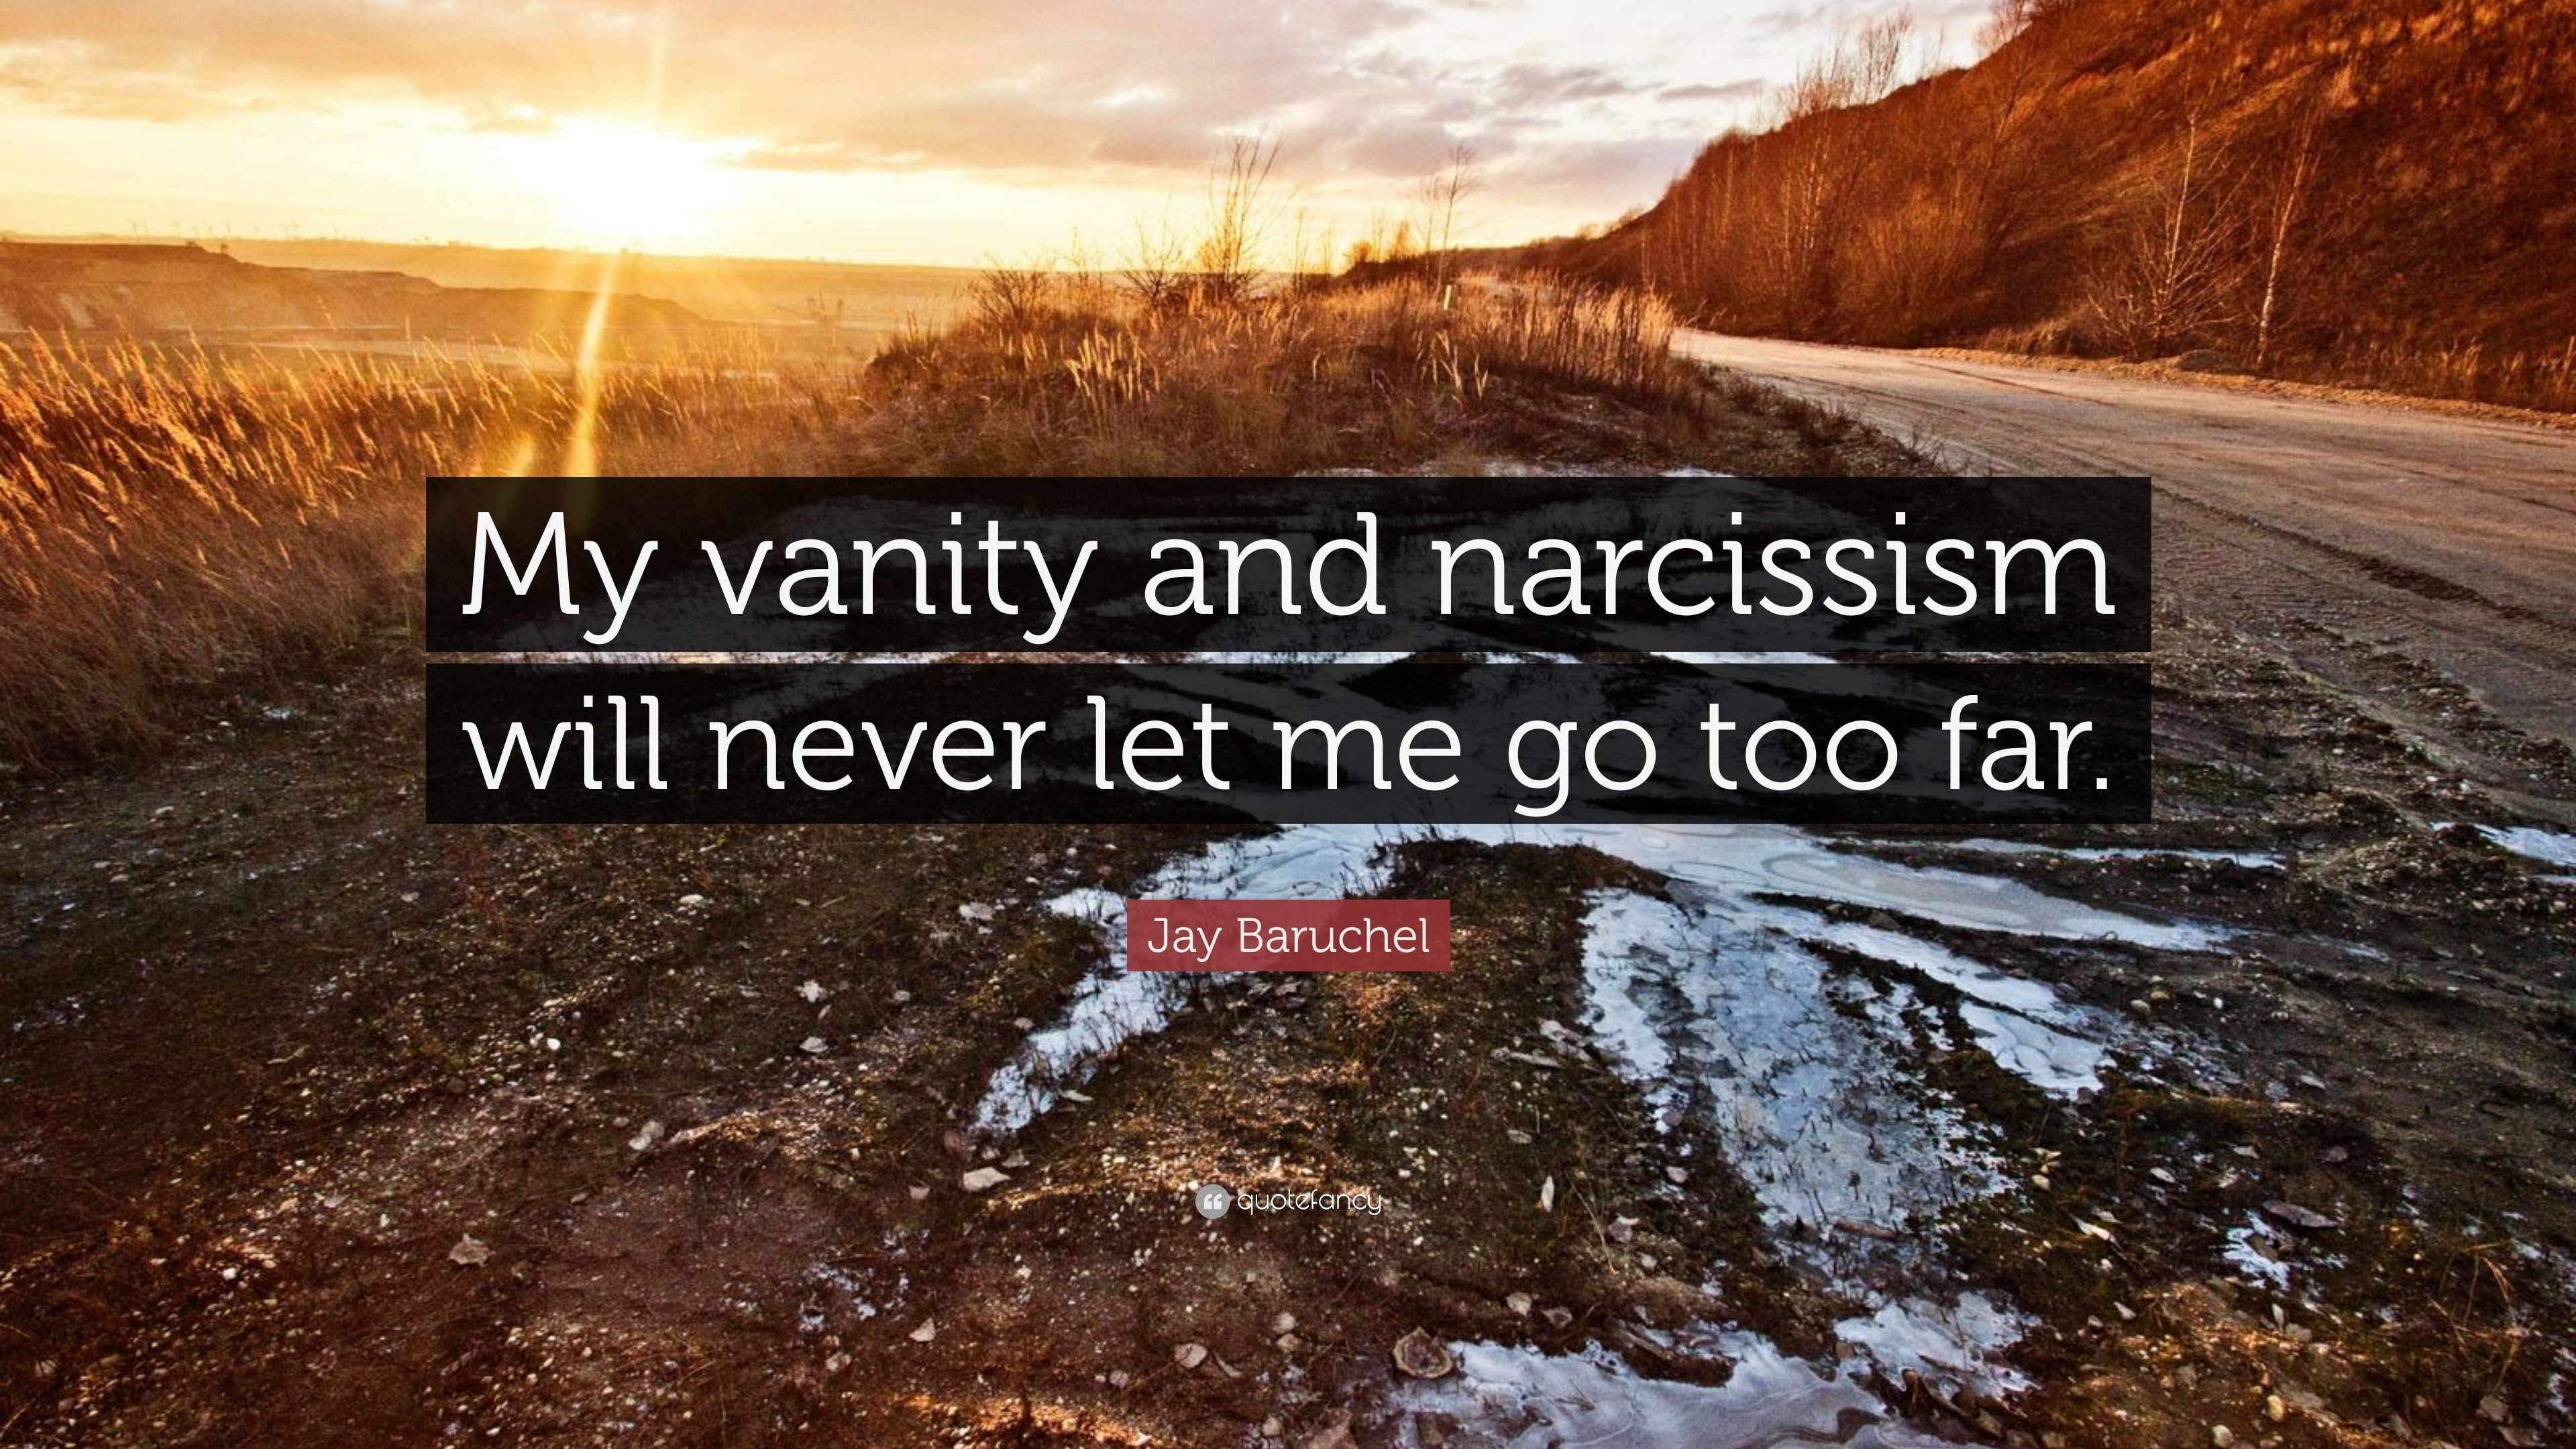 Jay Baruchel Quote: “My vanity and narcissism will never let me go